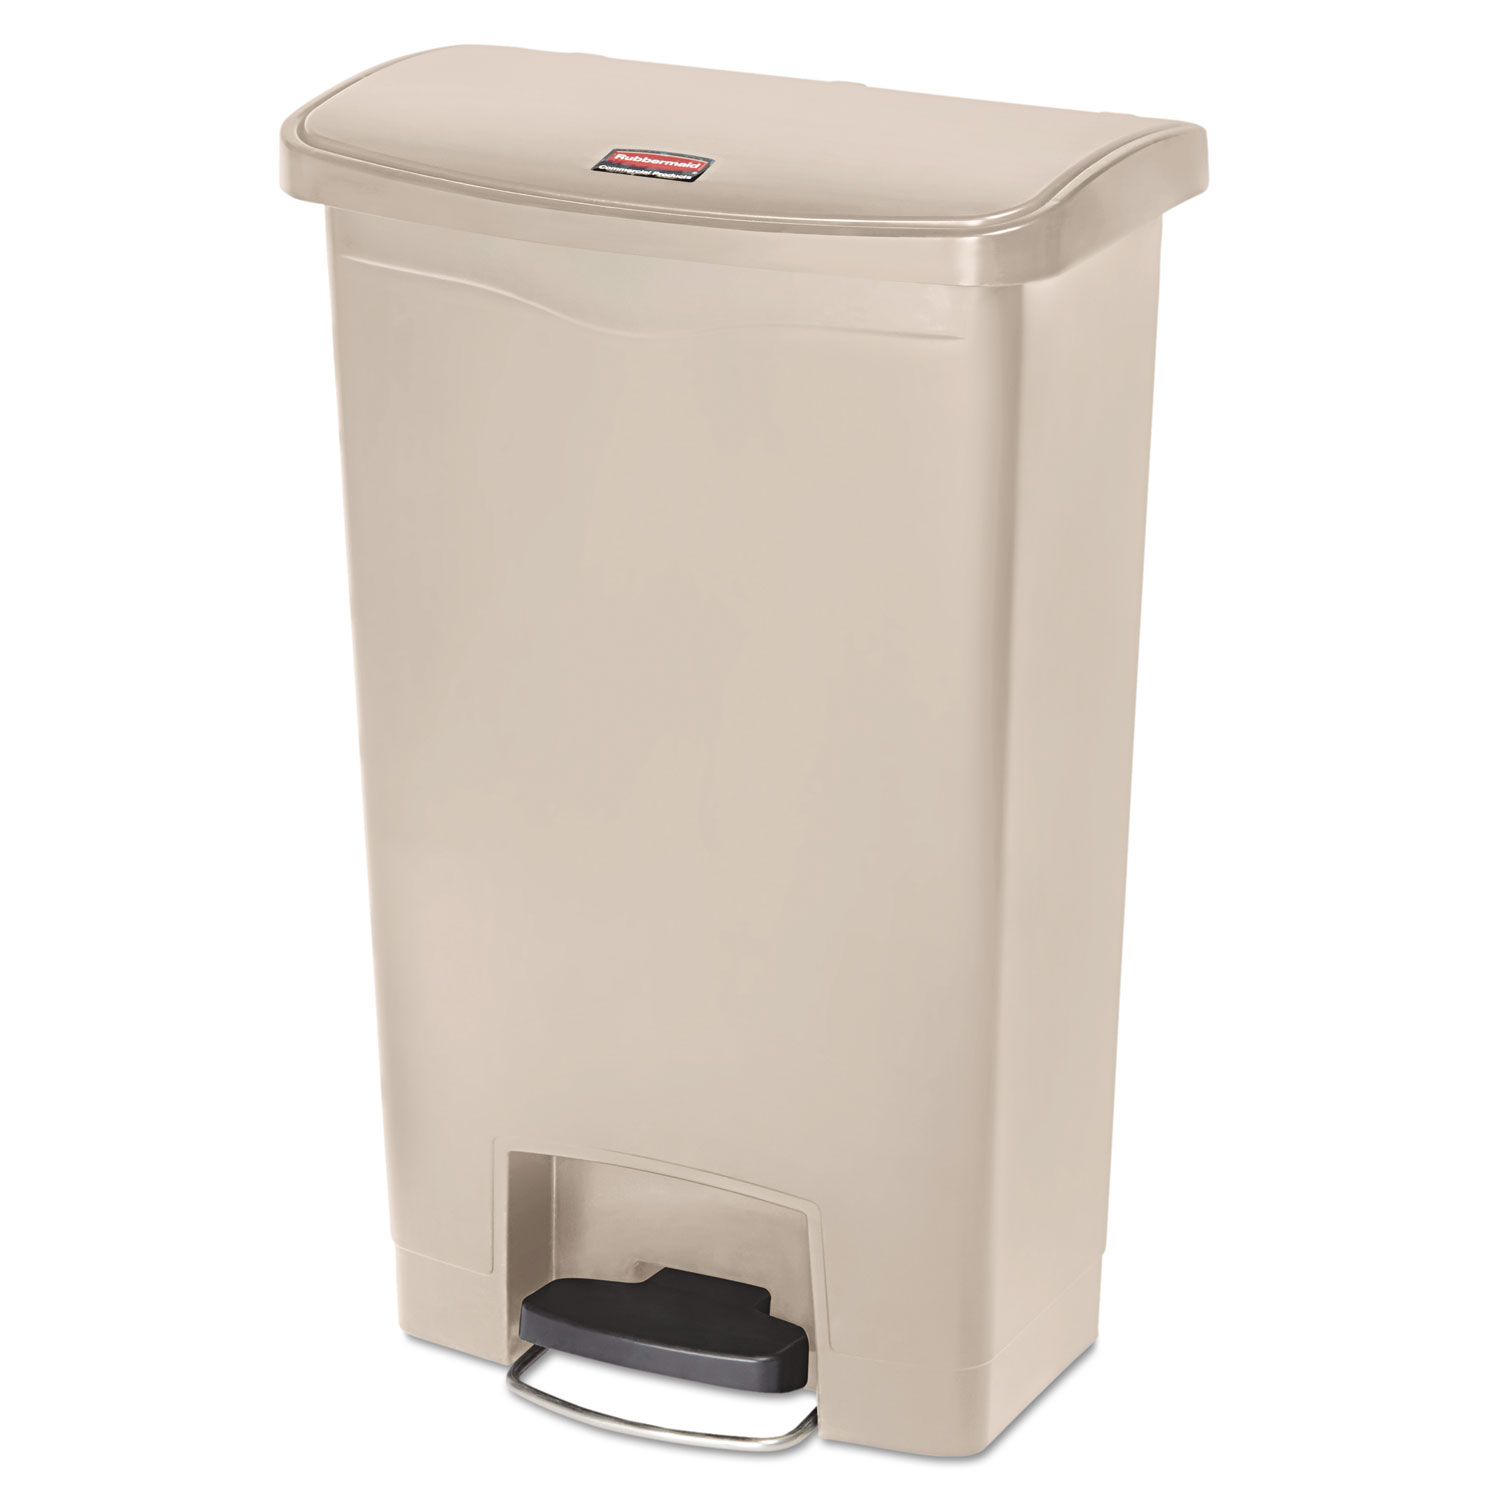  Rubbermaid Commercial 1883458 Slim Jim Resin Step-On Container, Front Step Style, 13 gal, Beige (RCP1883458) 